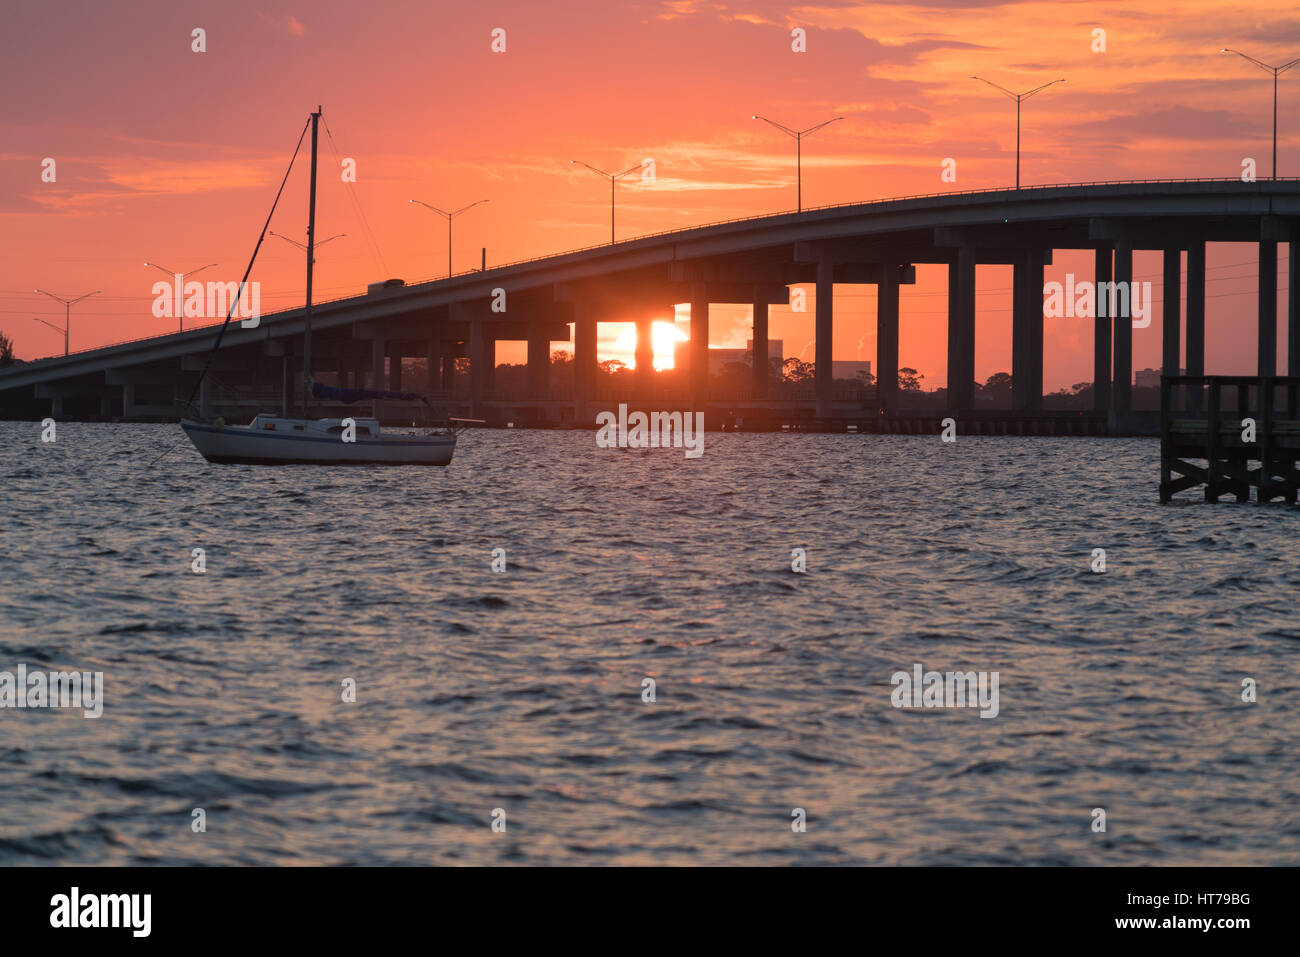 The Sun Rises behind the Eau Gallie Causeway Bridge between Melbourne's mainland and the barrier island and beaches Stock Photo